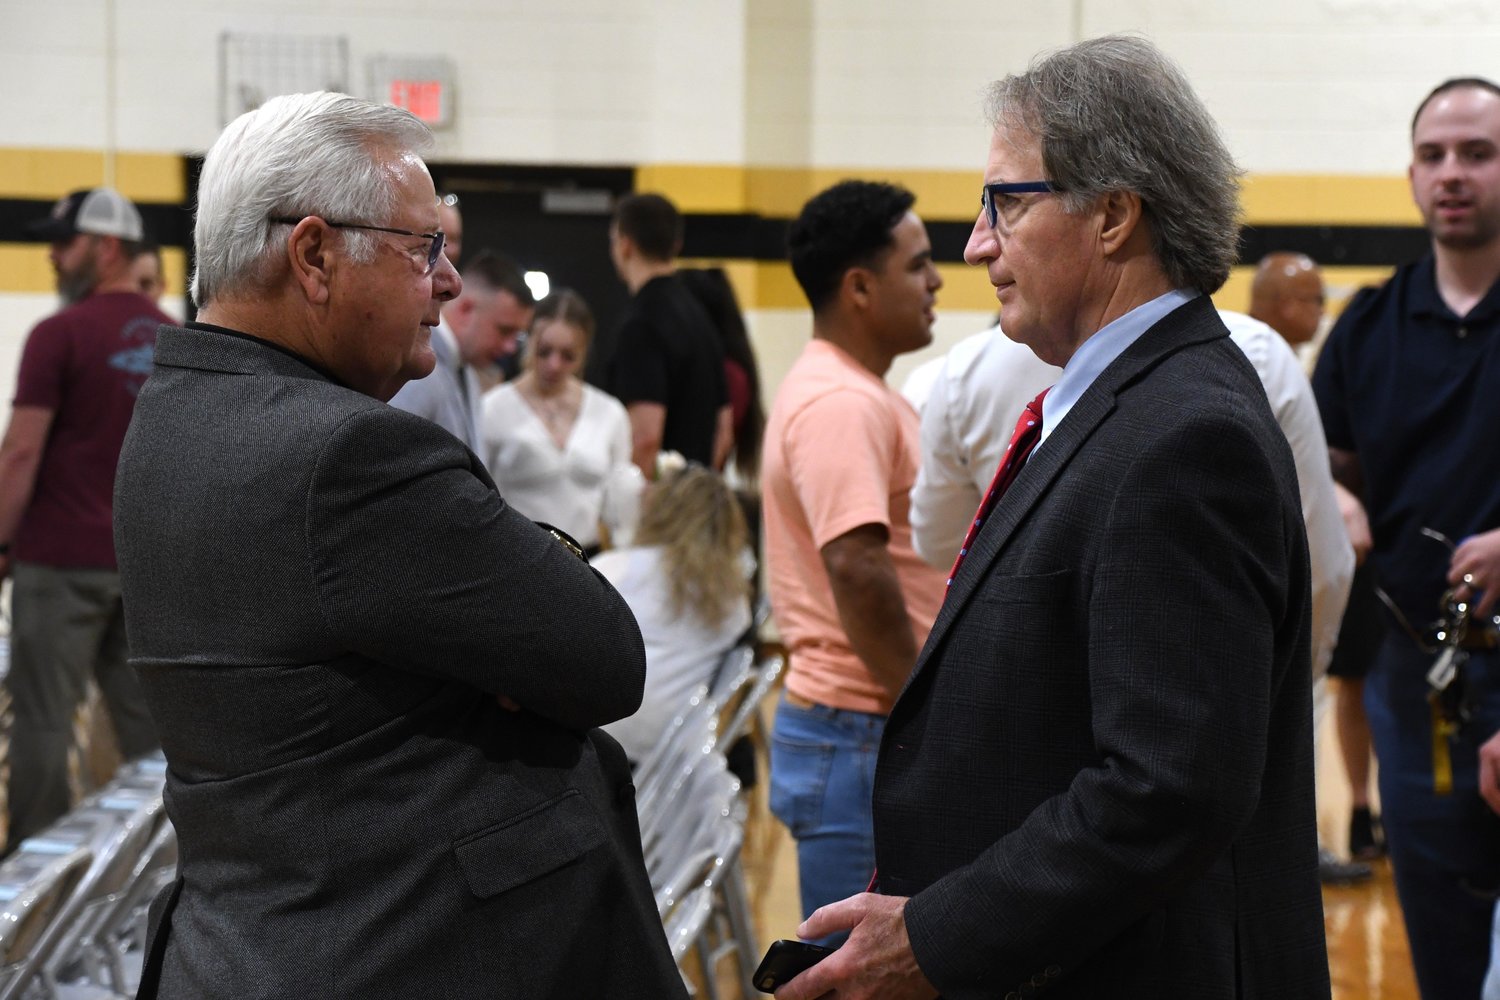 Larry Keen, the outgoing president of Fayetteville Tech, talks with his successor, Mark Sorrells, after Fall Convocation In August.